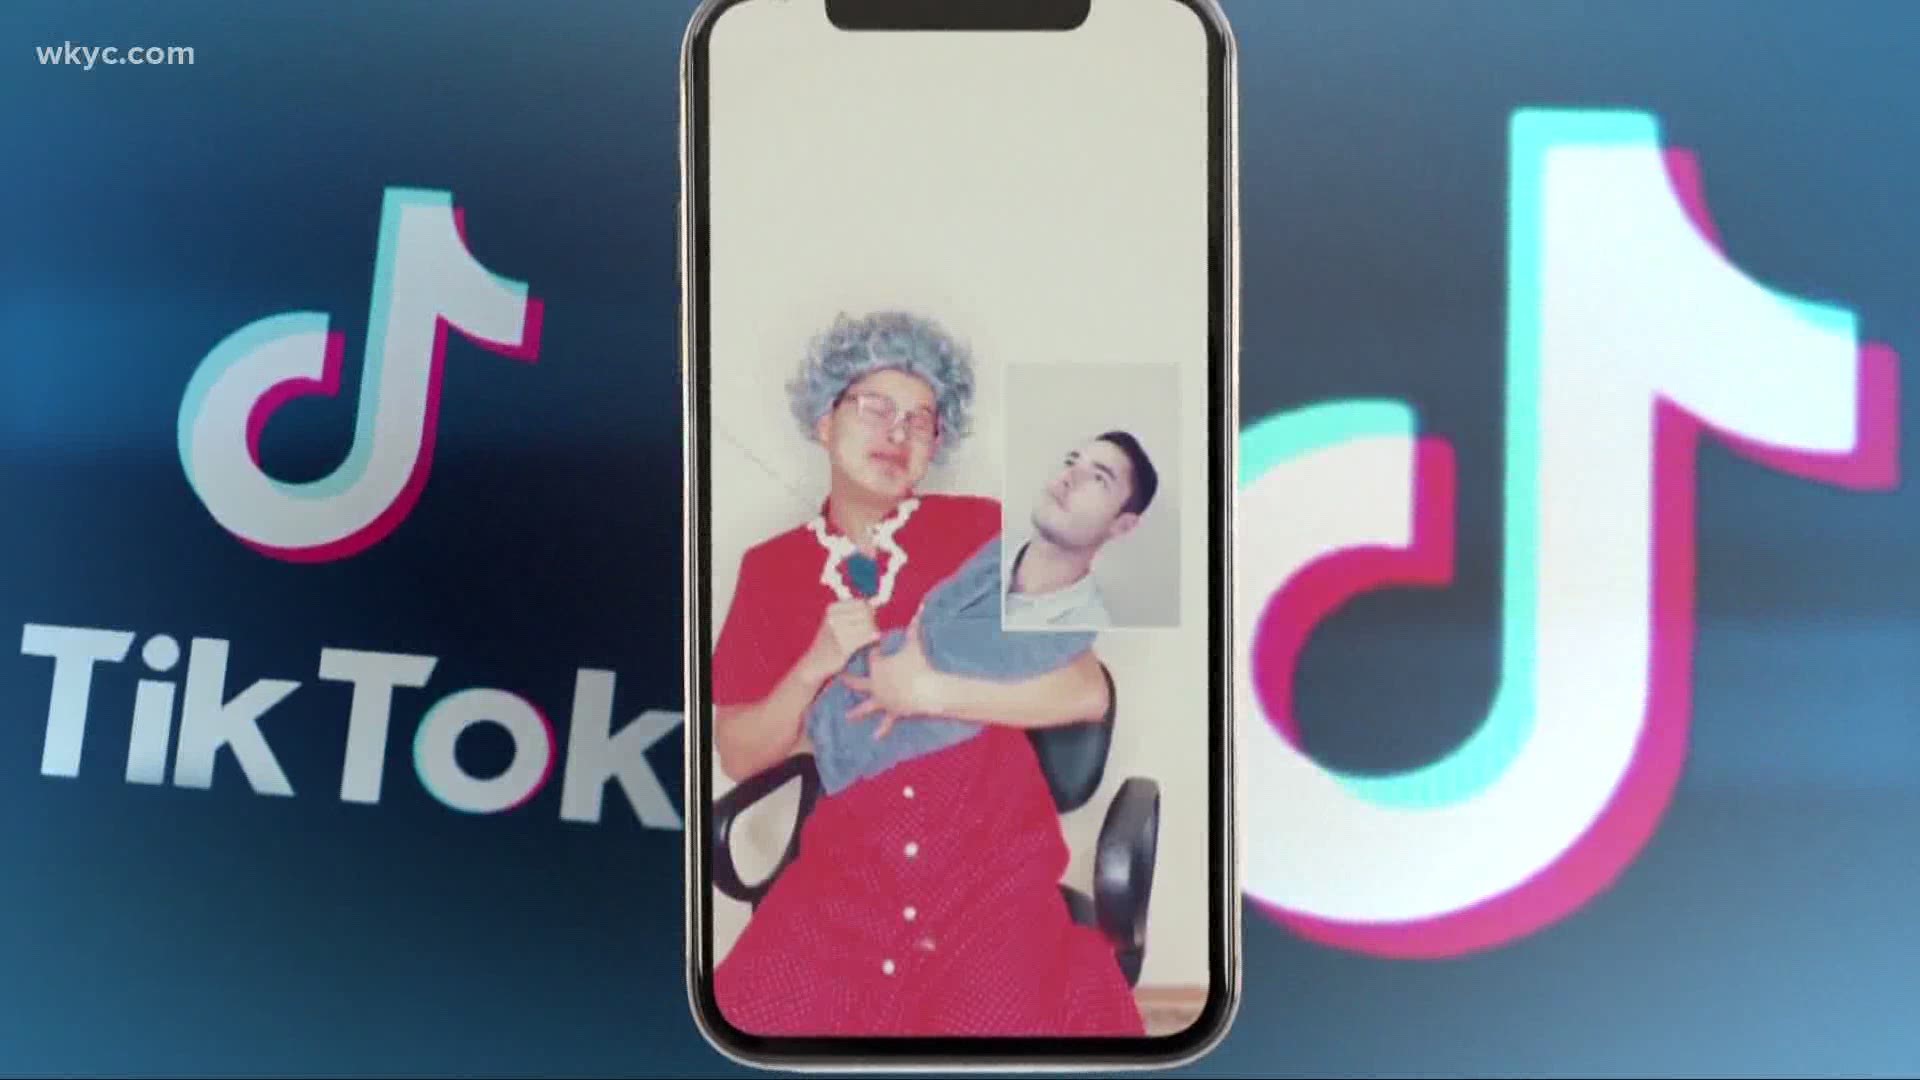 The Executive Order will prohibit U.S. companies and citizens from using TIKTOK.  The President cites privacy concerns over the app.